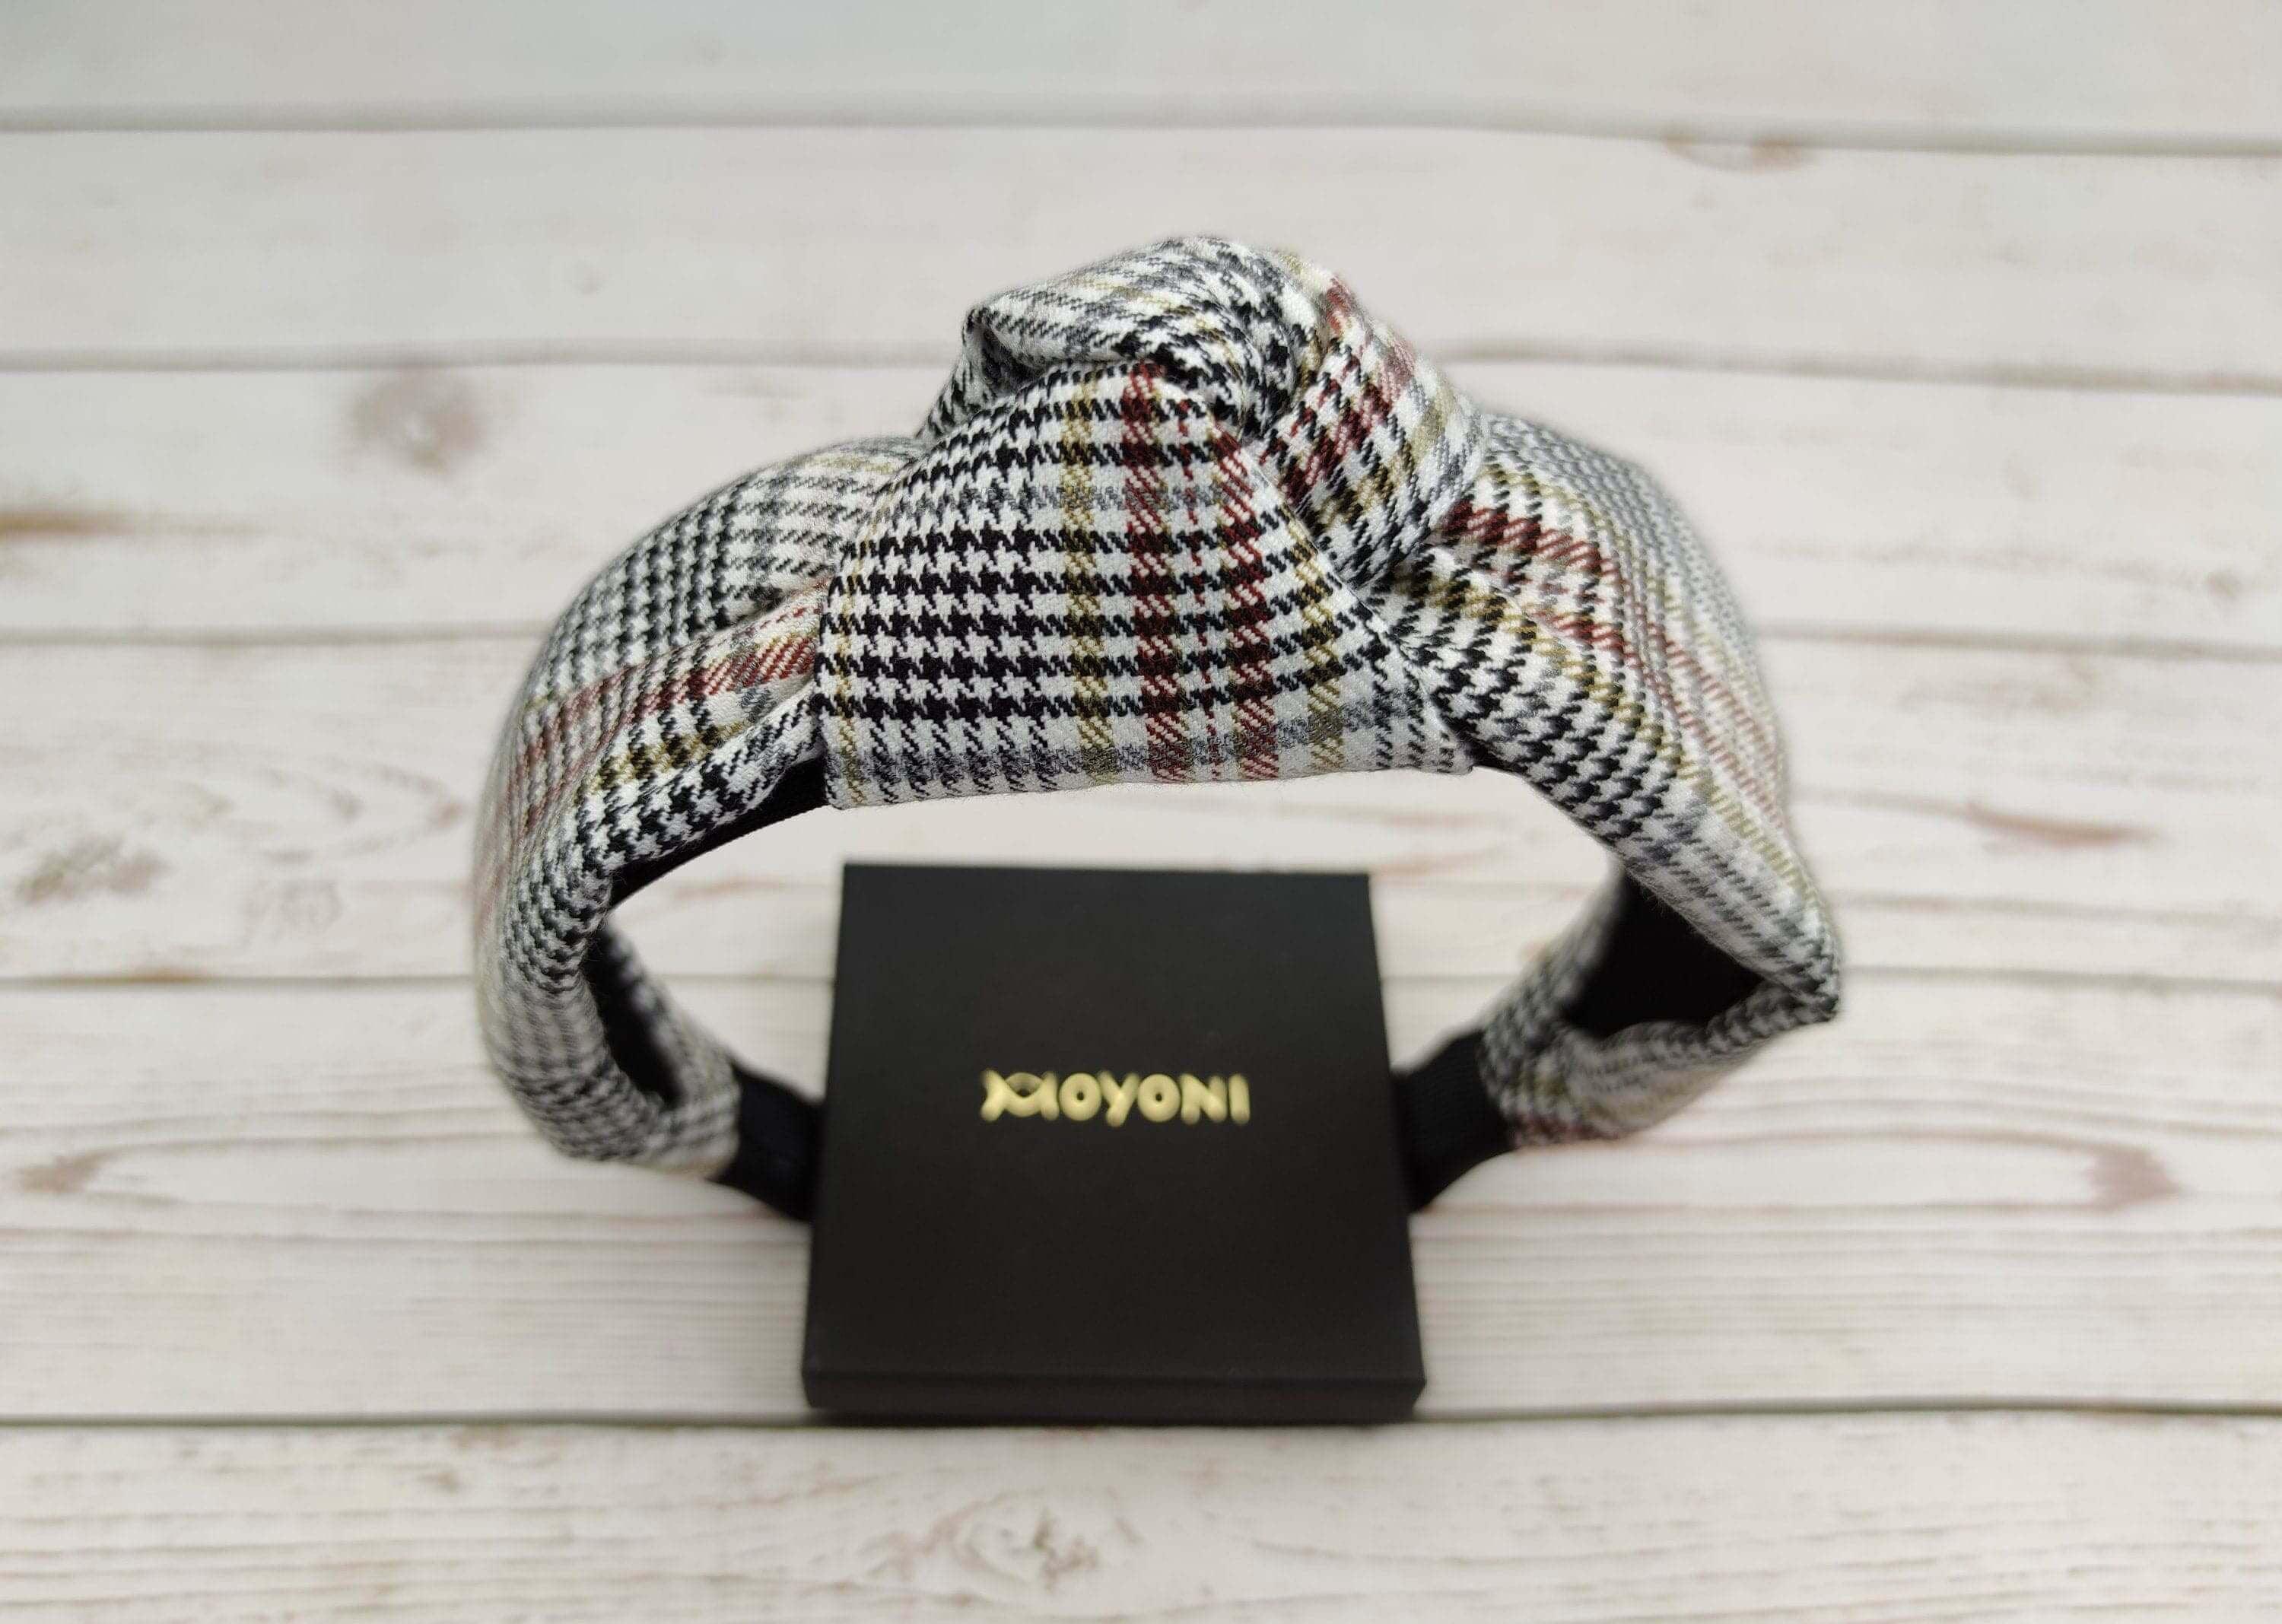 Premium White and Black Crepe Knotted Headband - Casual Fashion Houndstooth Hairband for College with Yellow Brown Striped Accents available at Moyoni Design